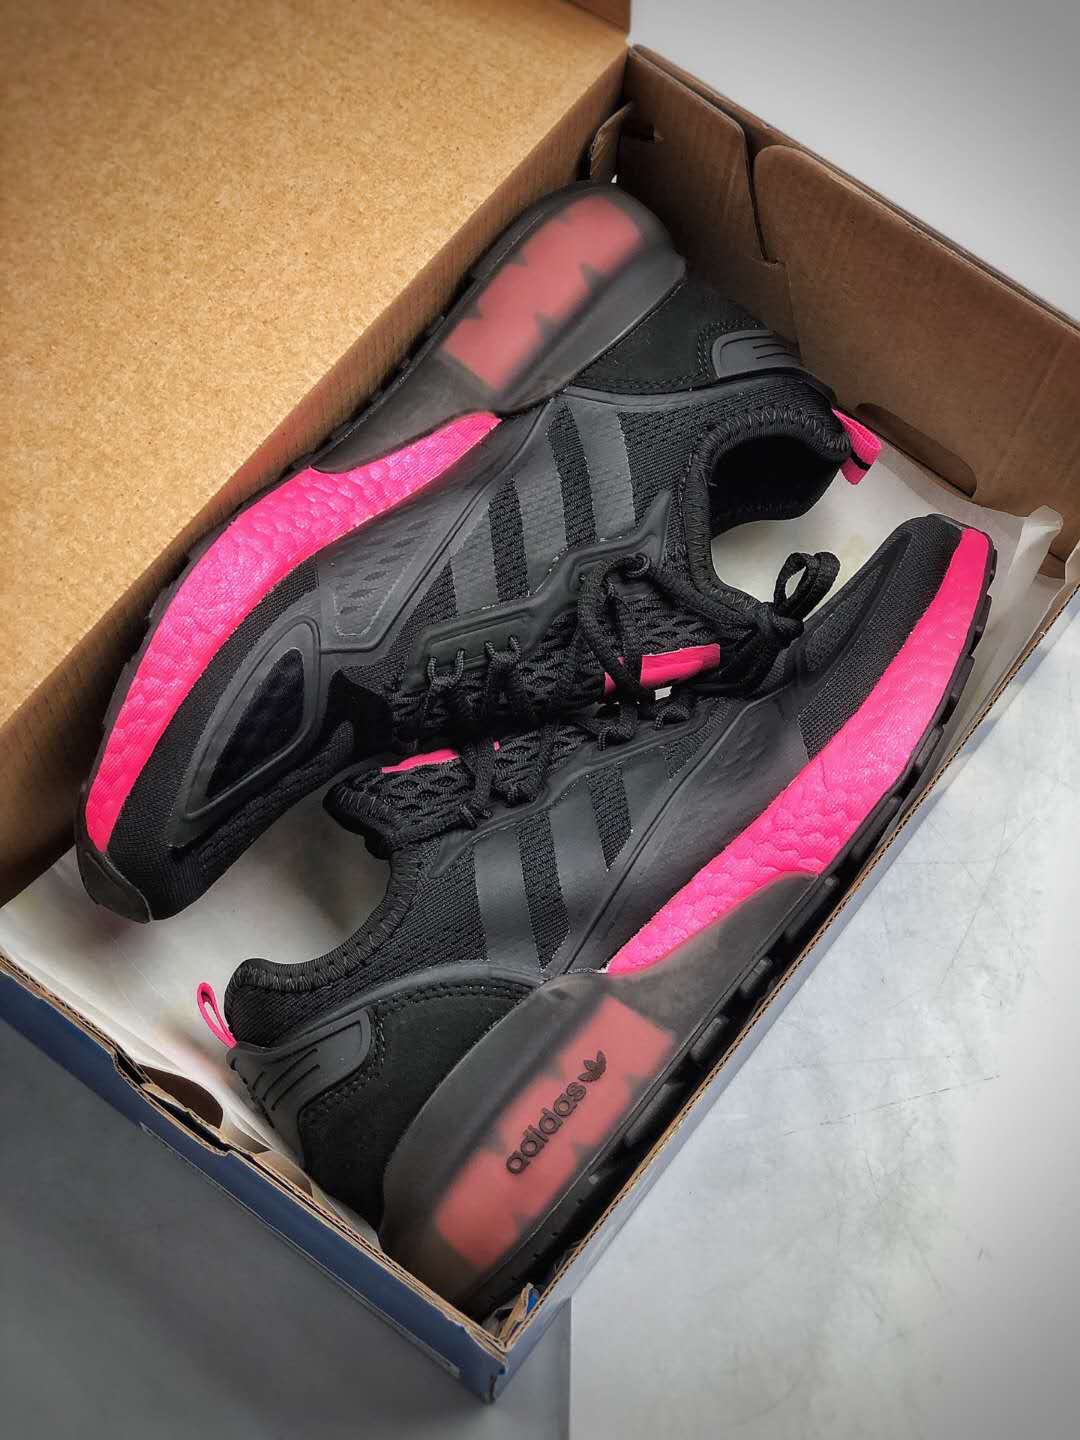 Adidas ZX 2K Boost Black Shock Pink FV8986 - Stylish and Comfortable Footwear